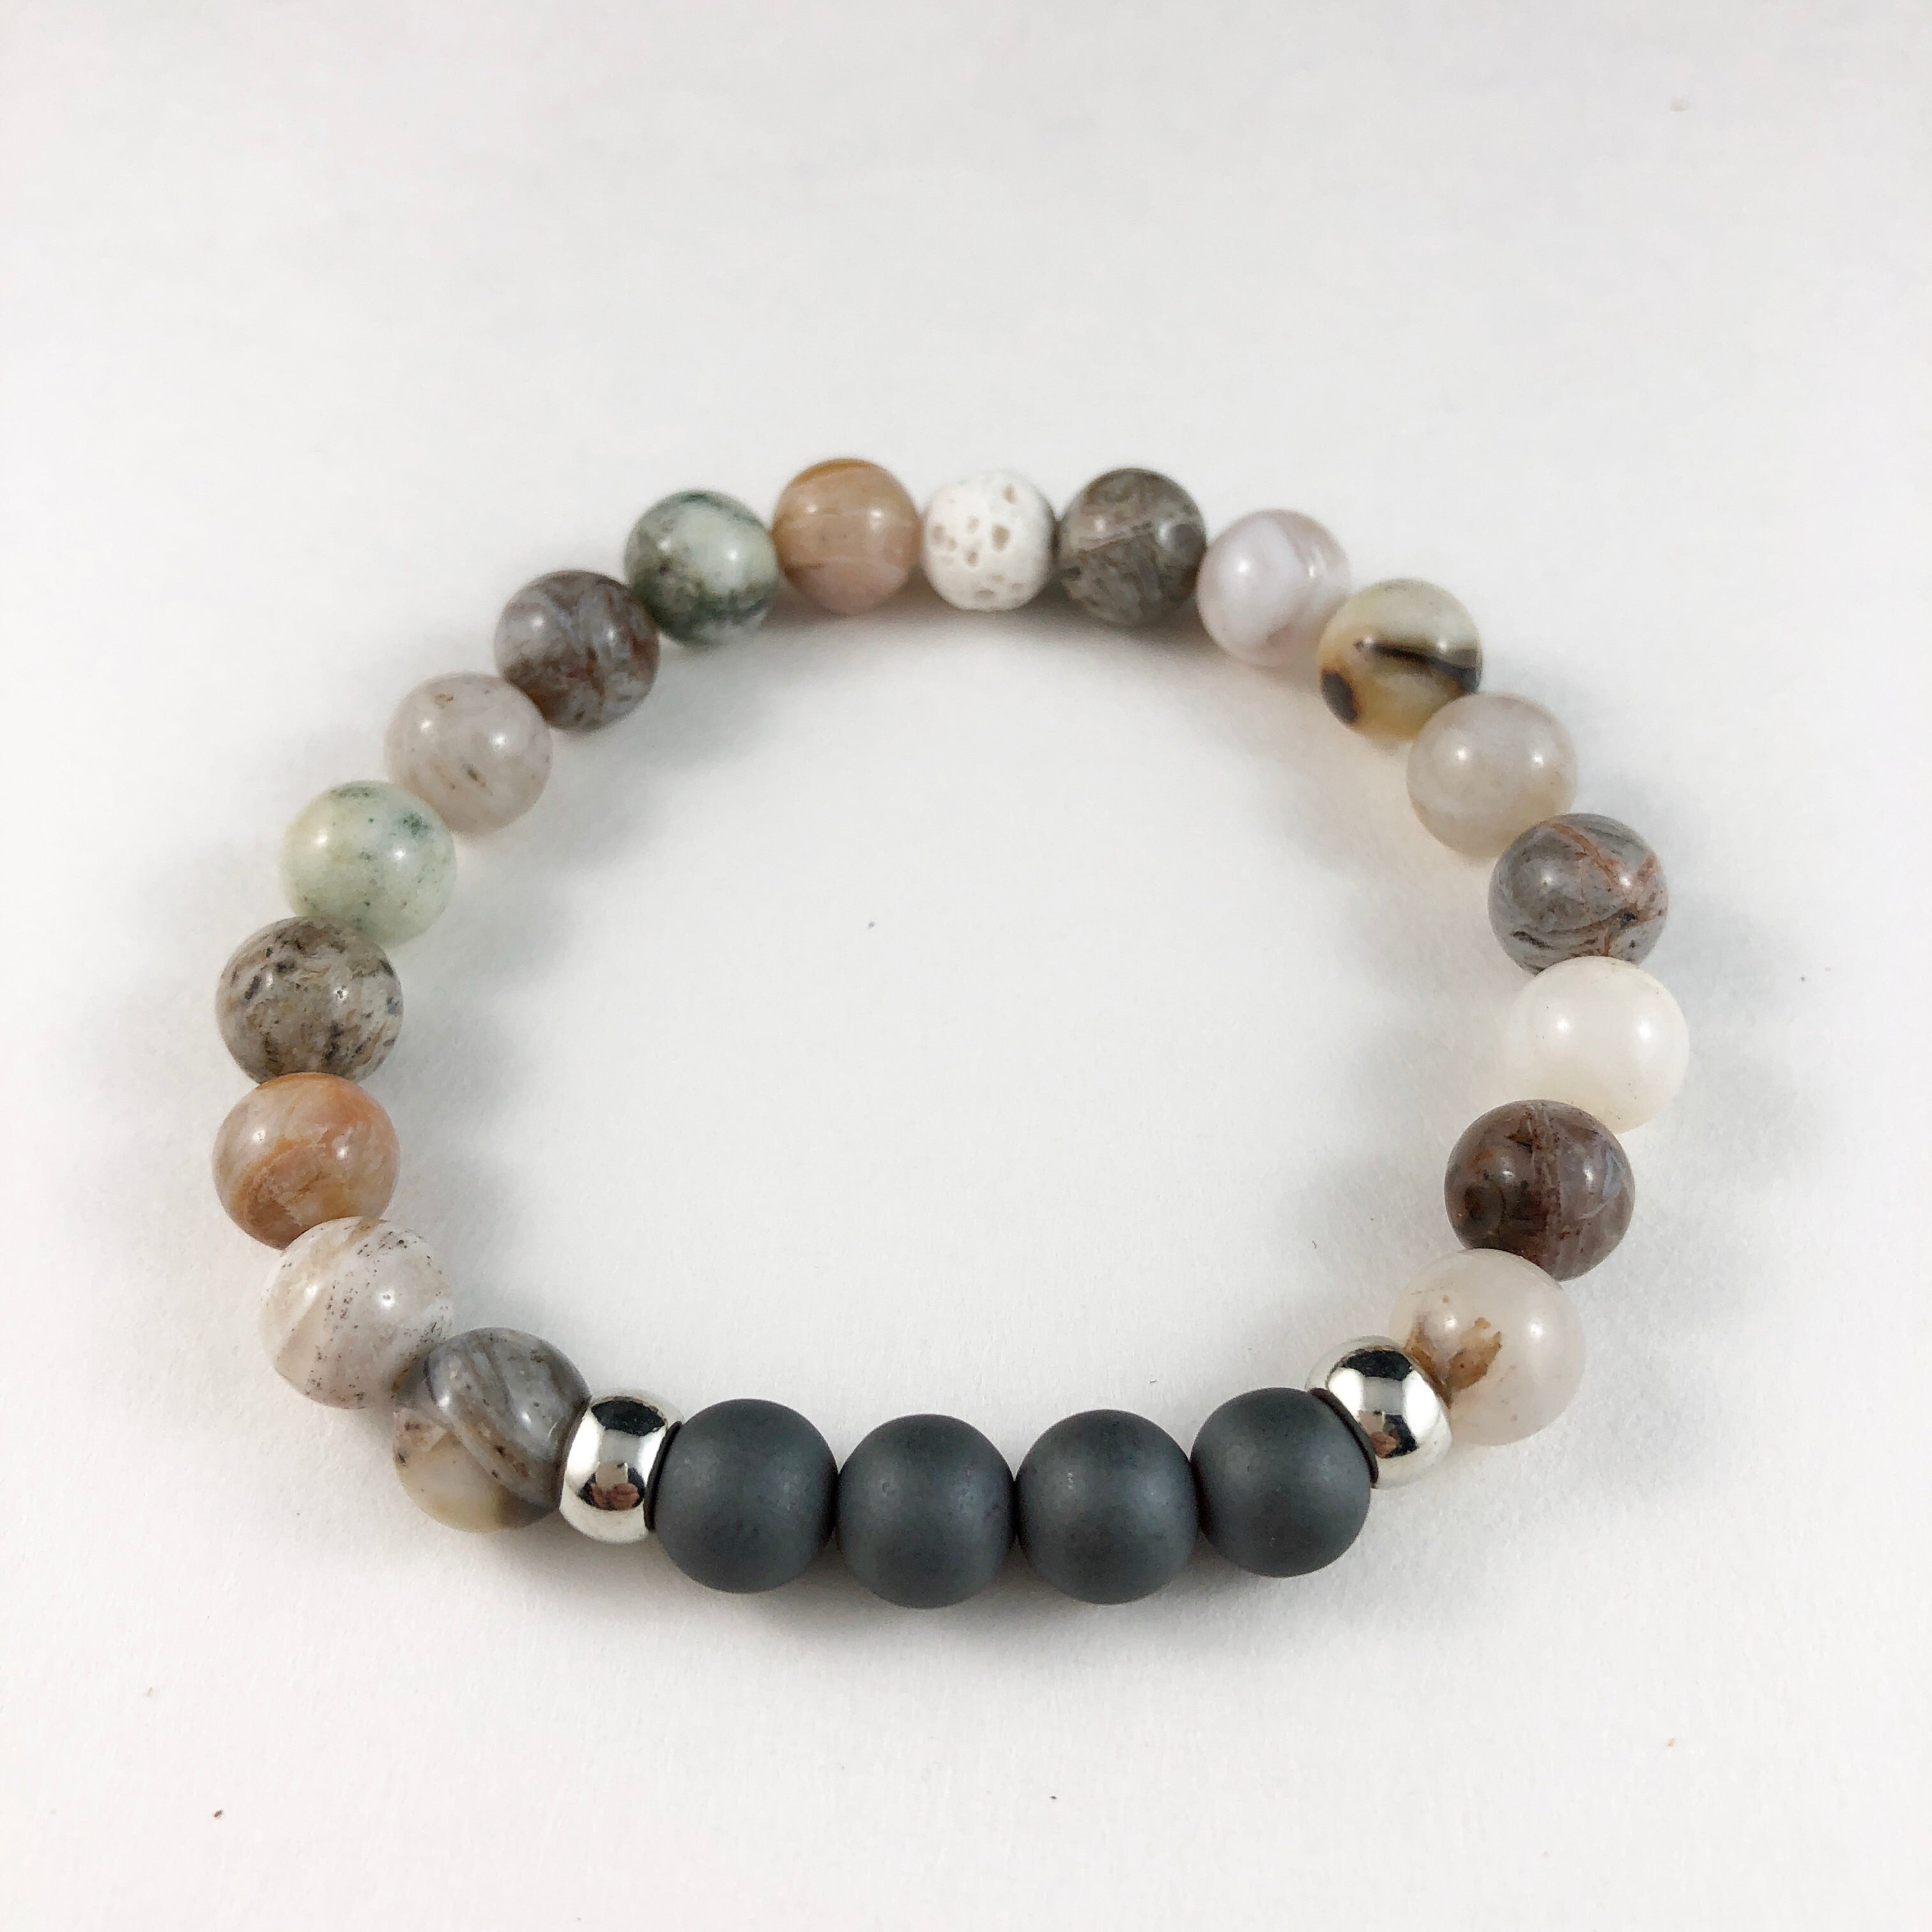 Bamboo Leaf Agate and Hematite Diffuser Bracelet with Silver Discs